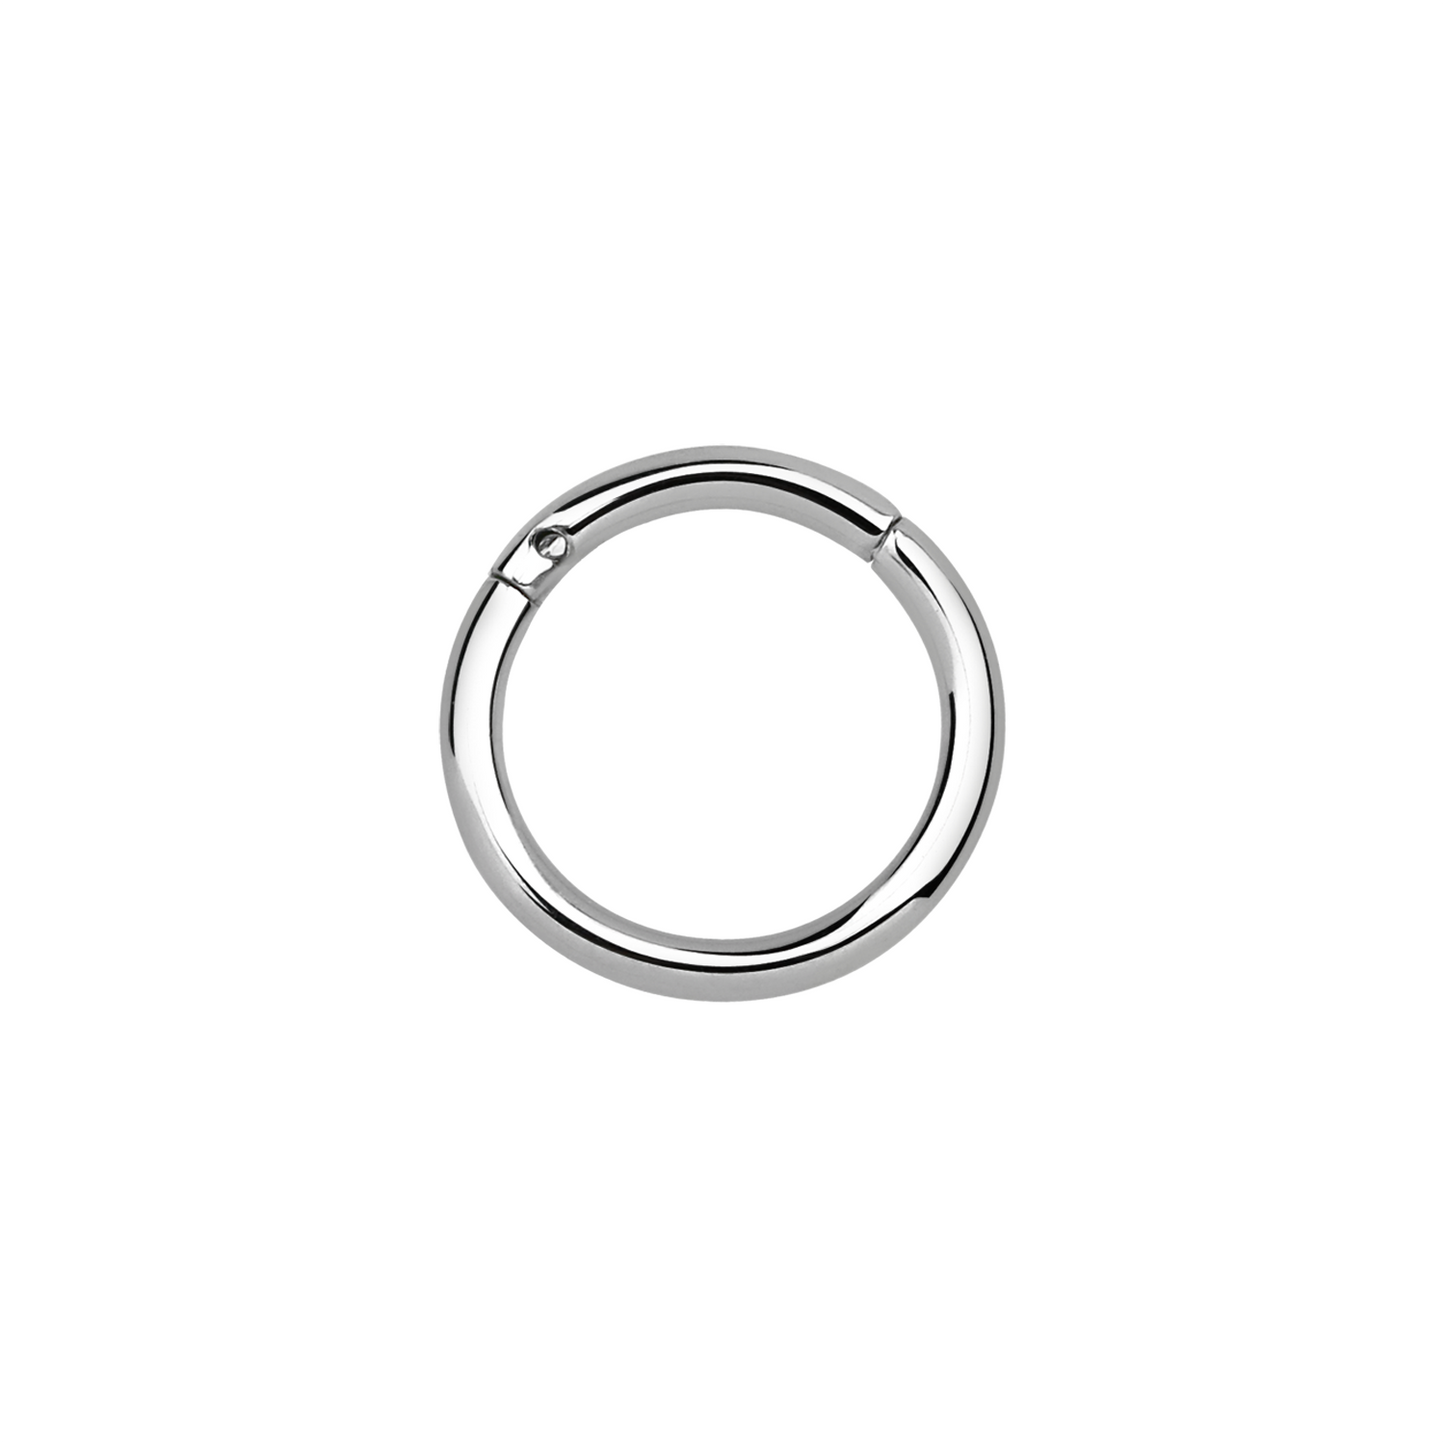 16g Silver Surgical Steel Hinged Ring